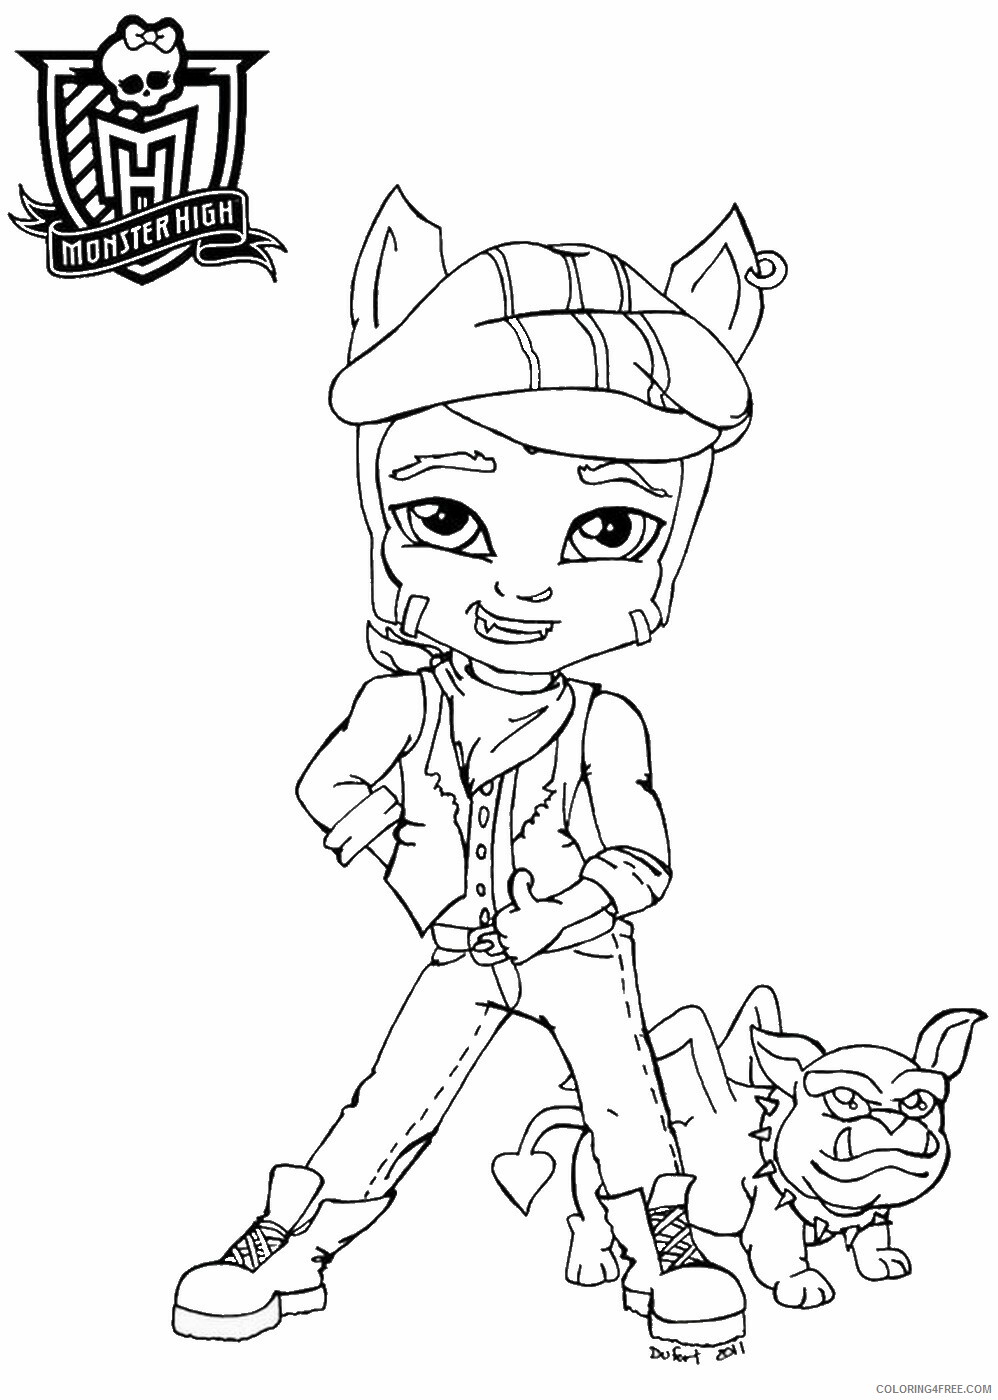 Monster High Coloring Pages monster_high_cl_36 Printable 2021 4178 Coloring4free